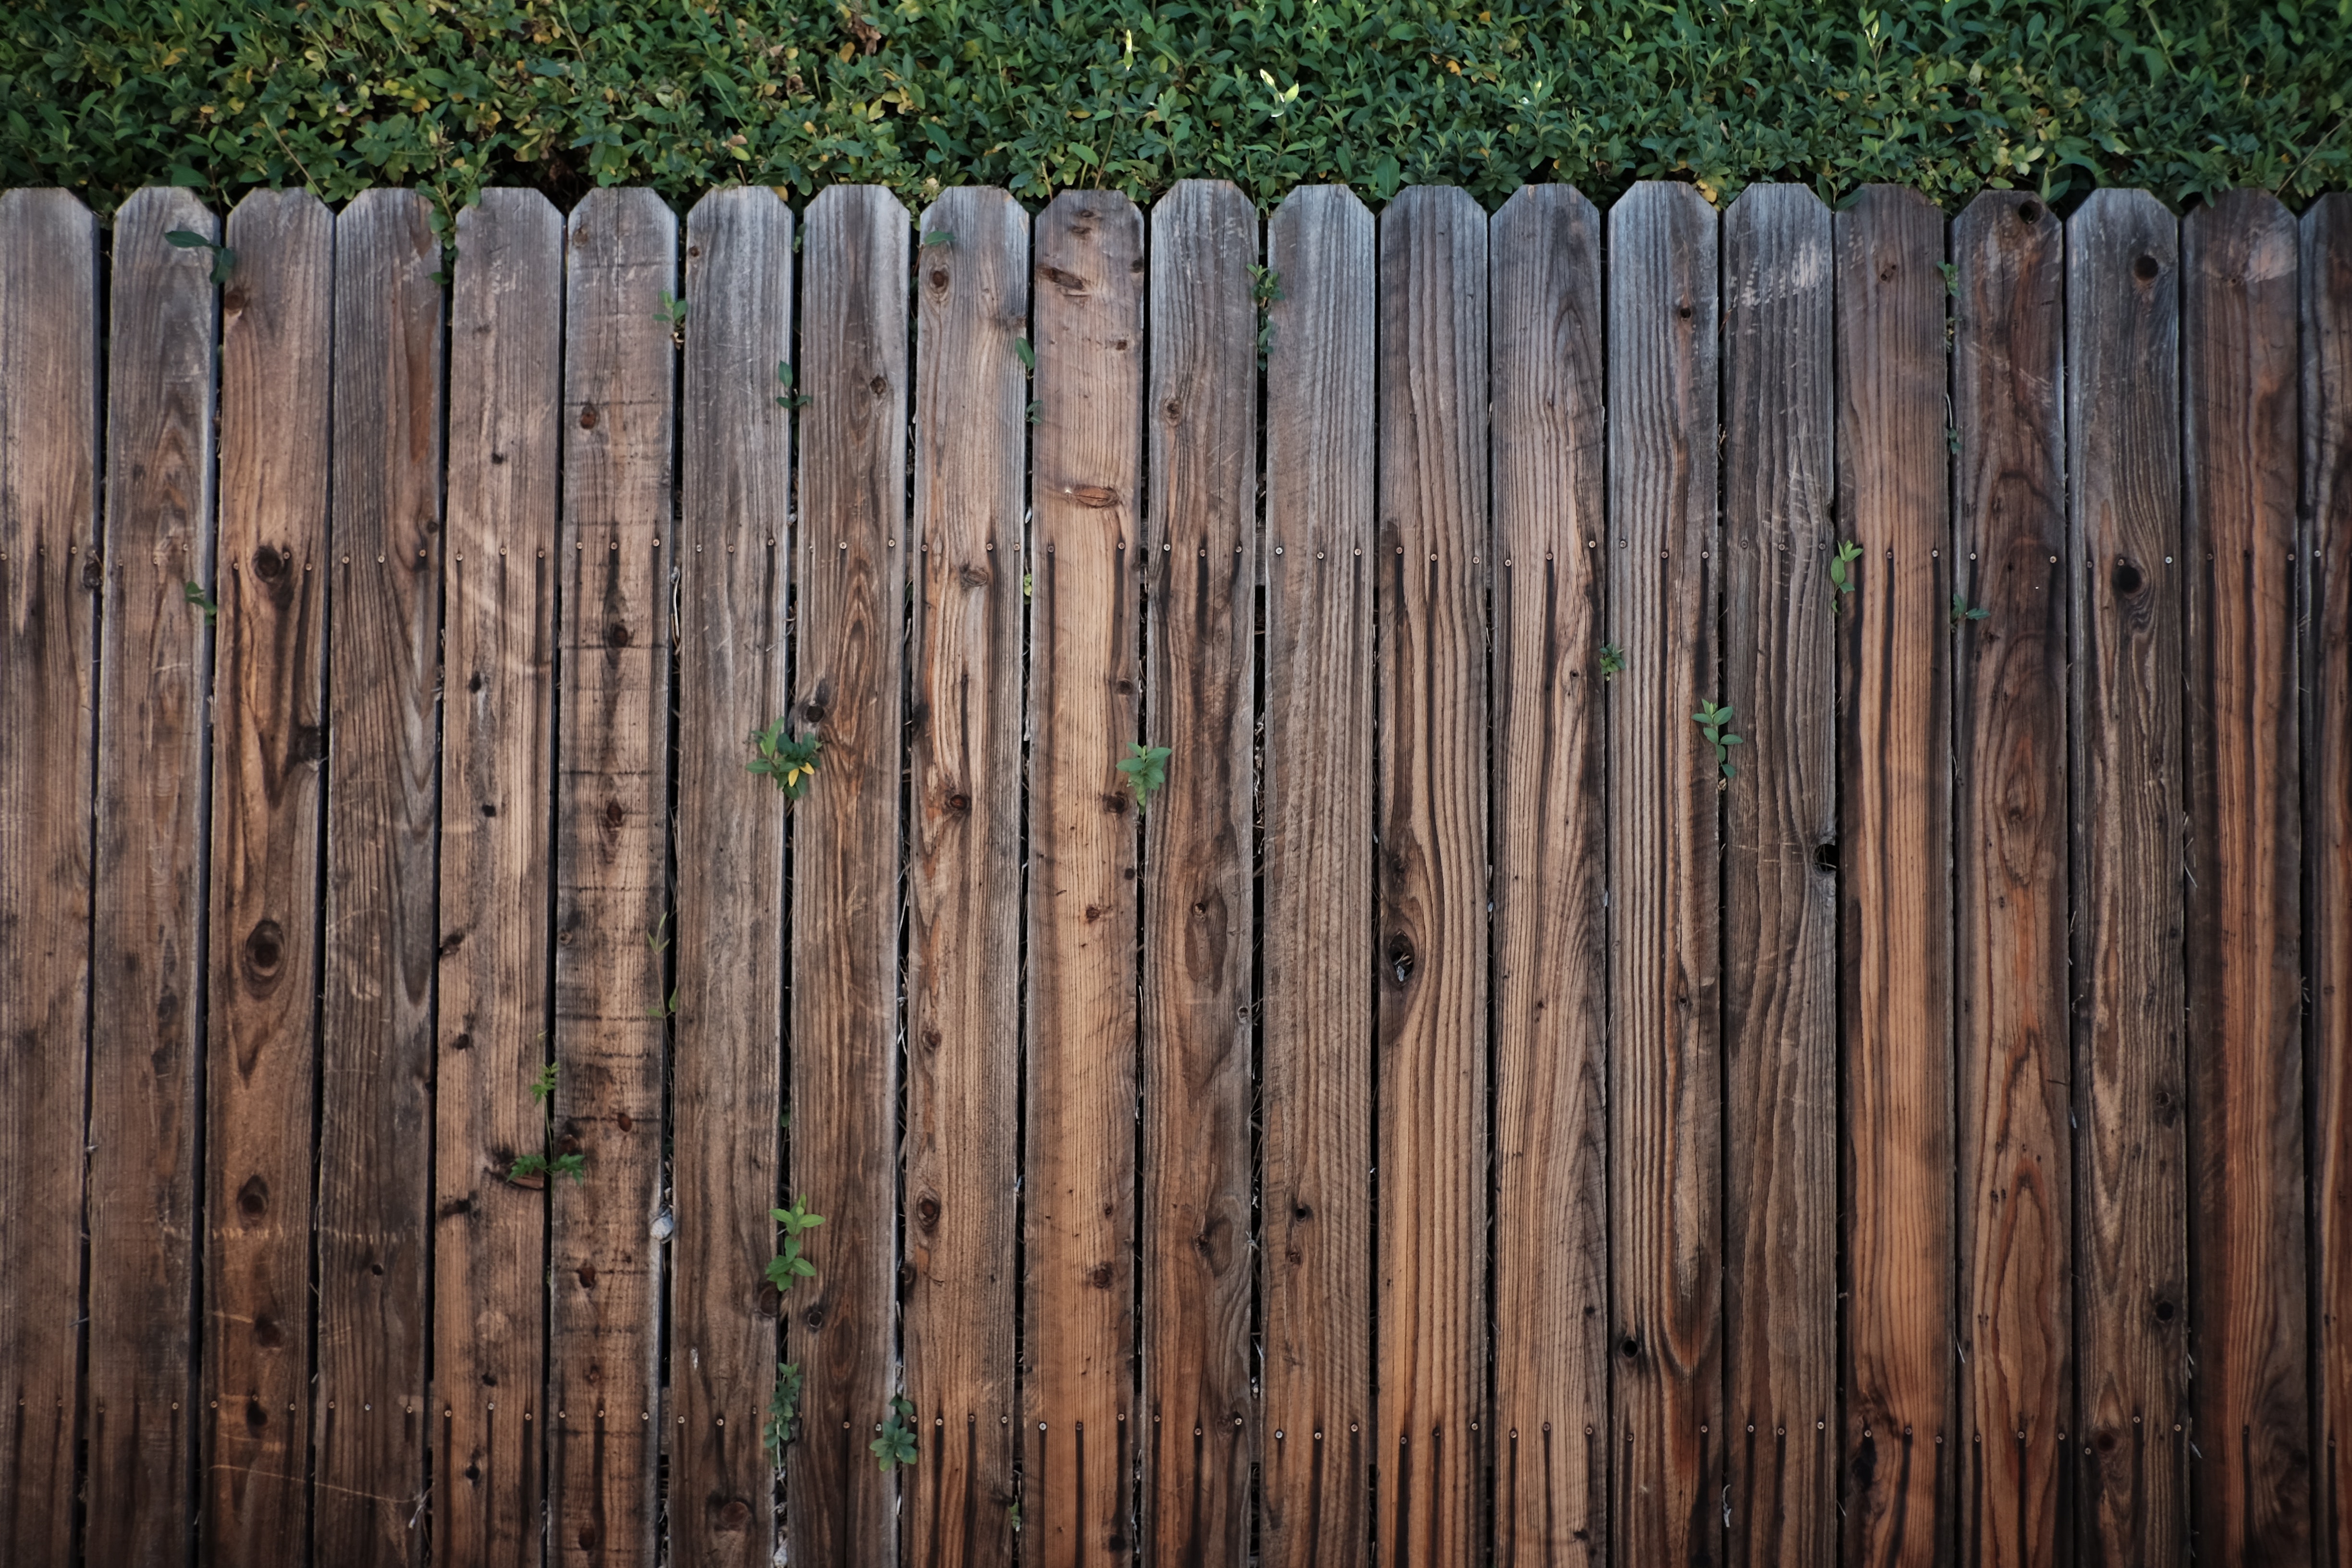 brown-wooden-fence-113726